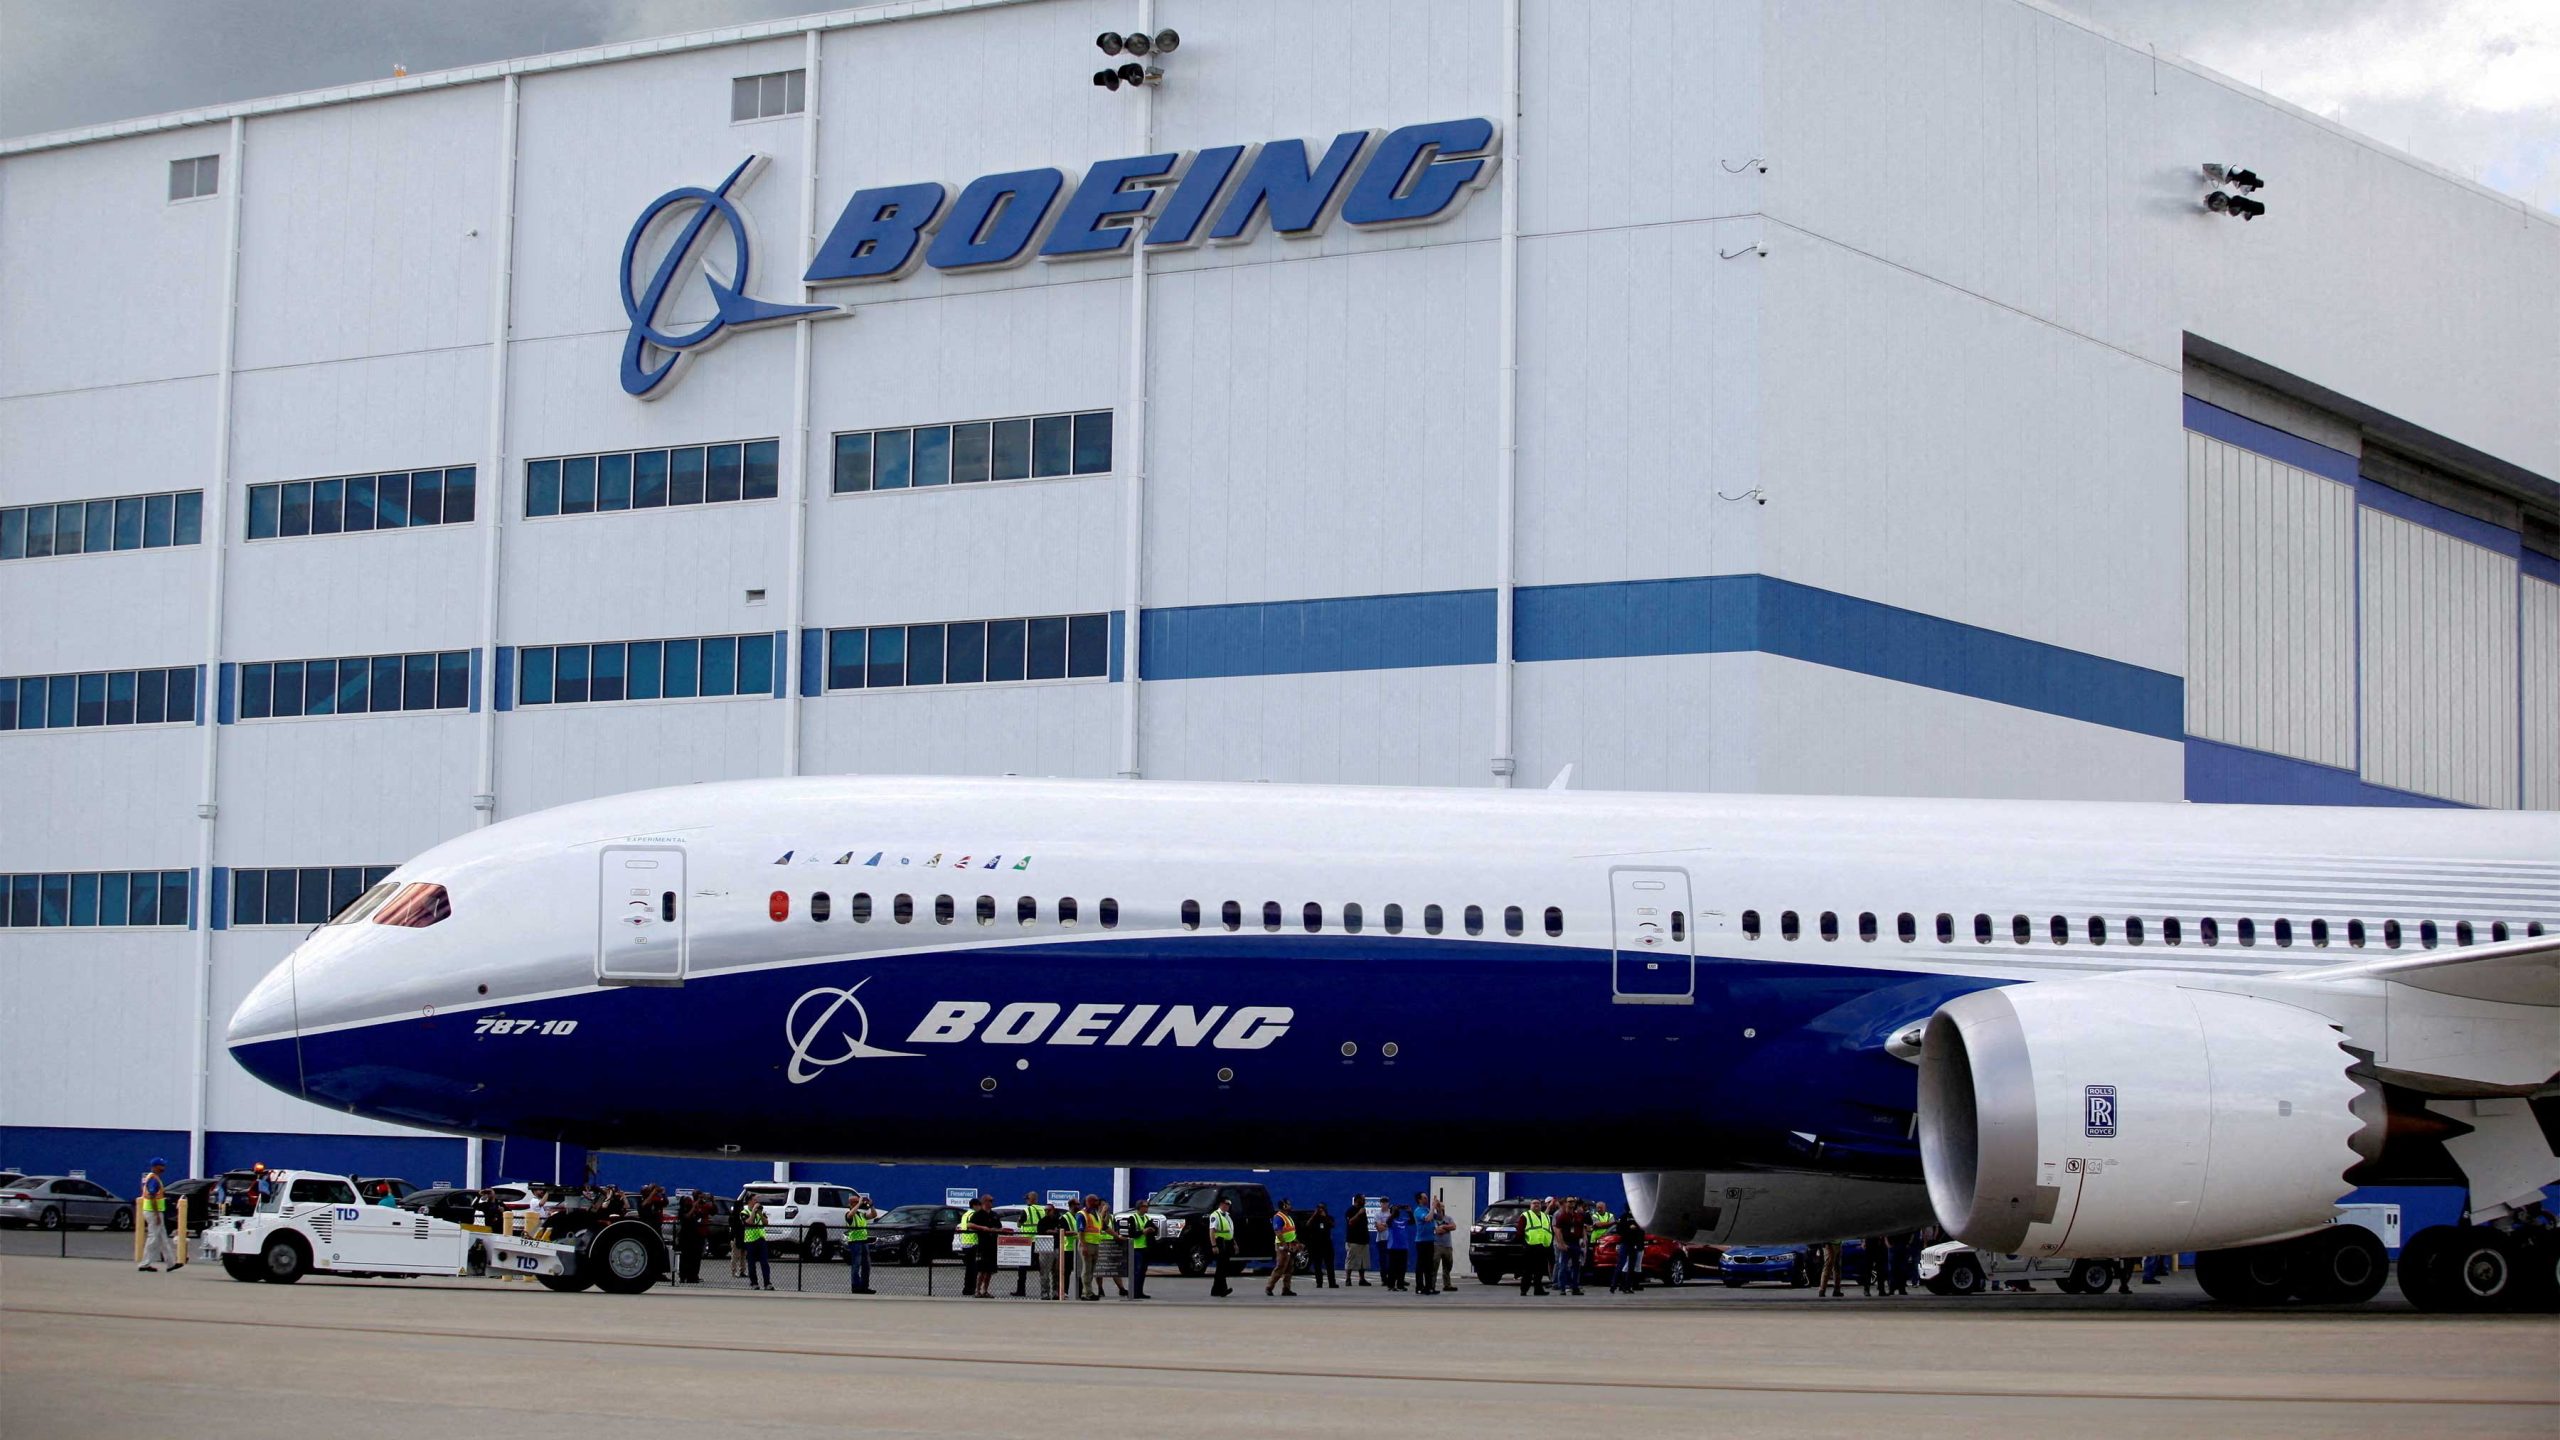 Alleged Insider says Boeing’s woes are symptom of ‘failure of our elites’ and DEI ripping our society apart [Video]